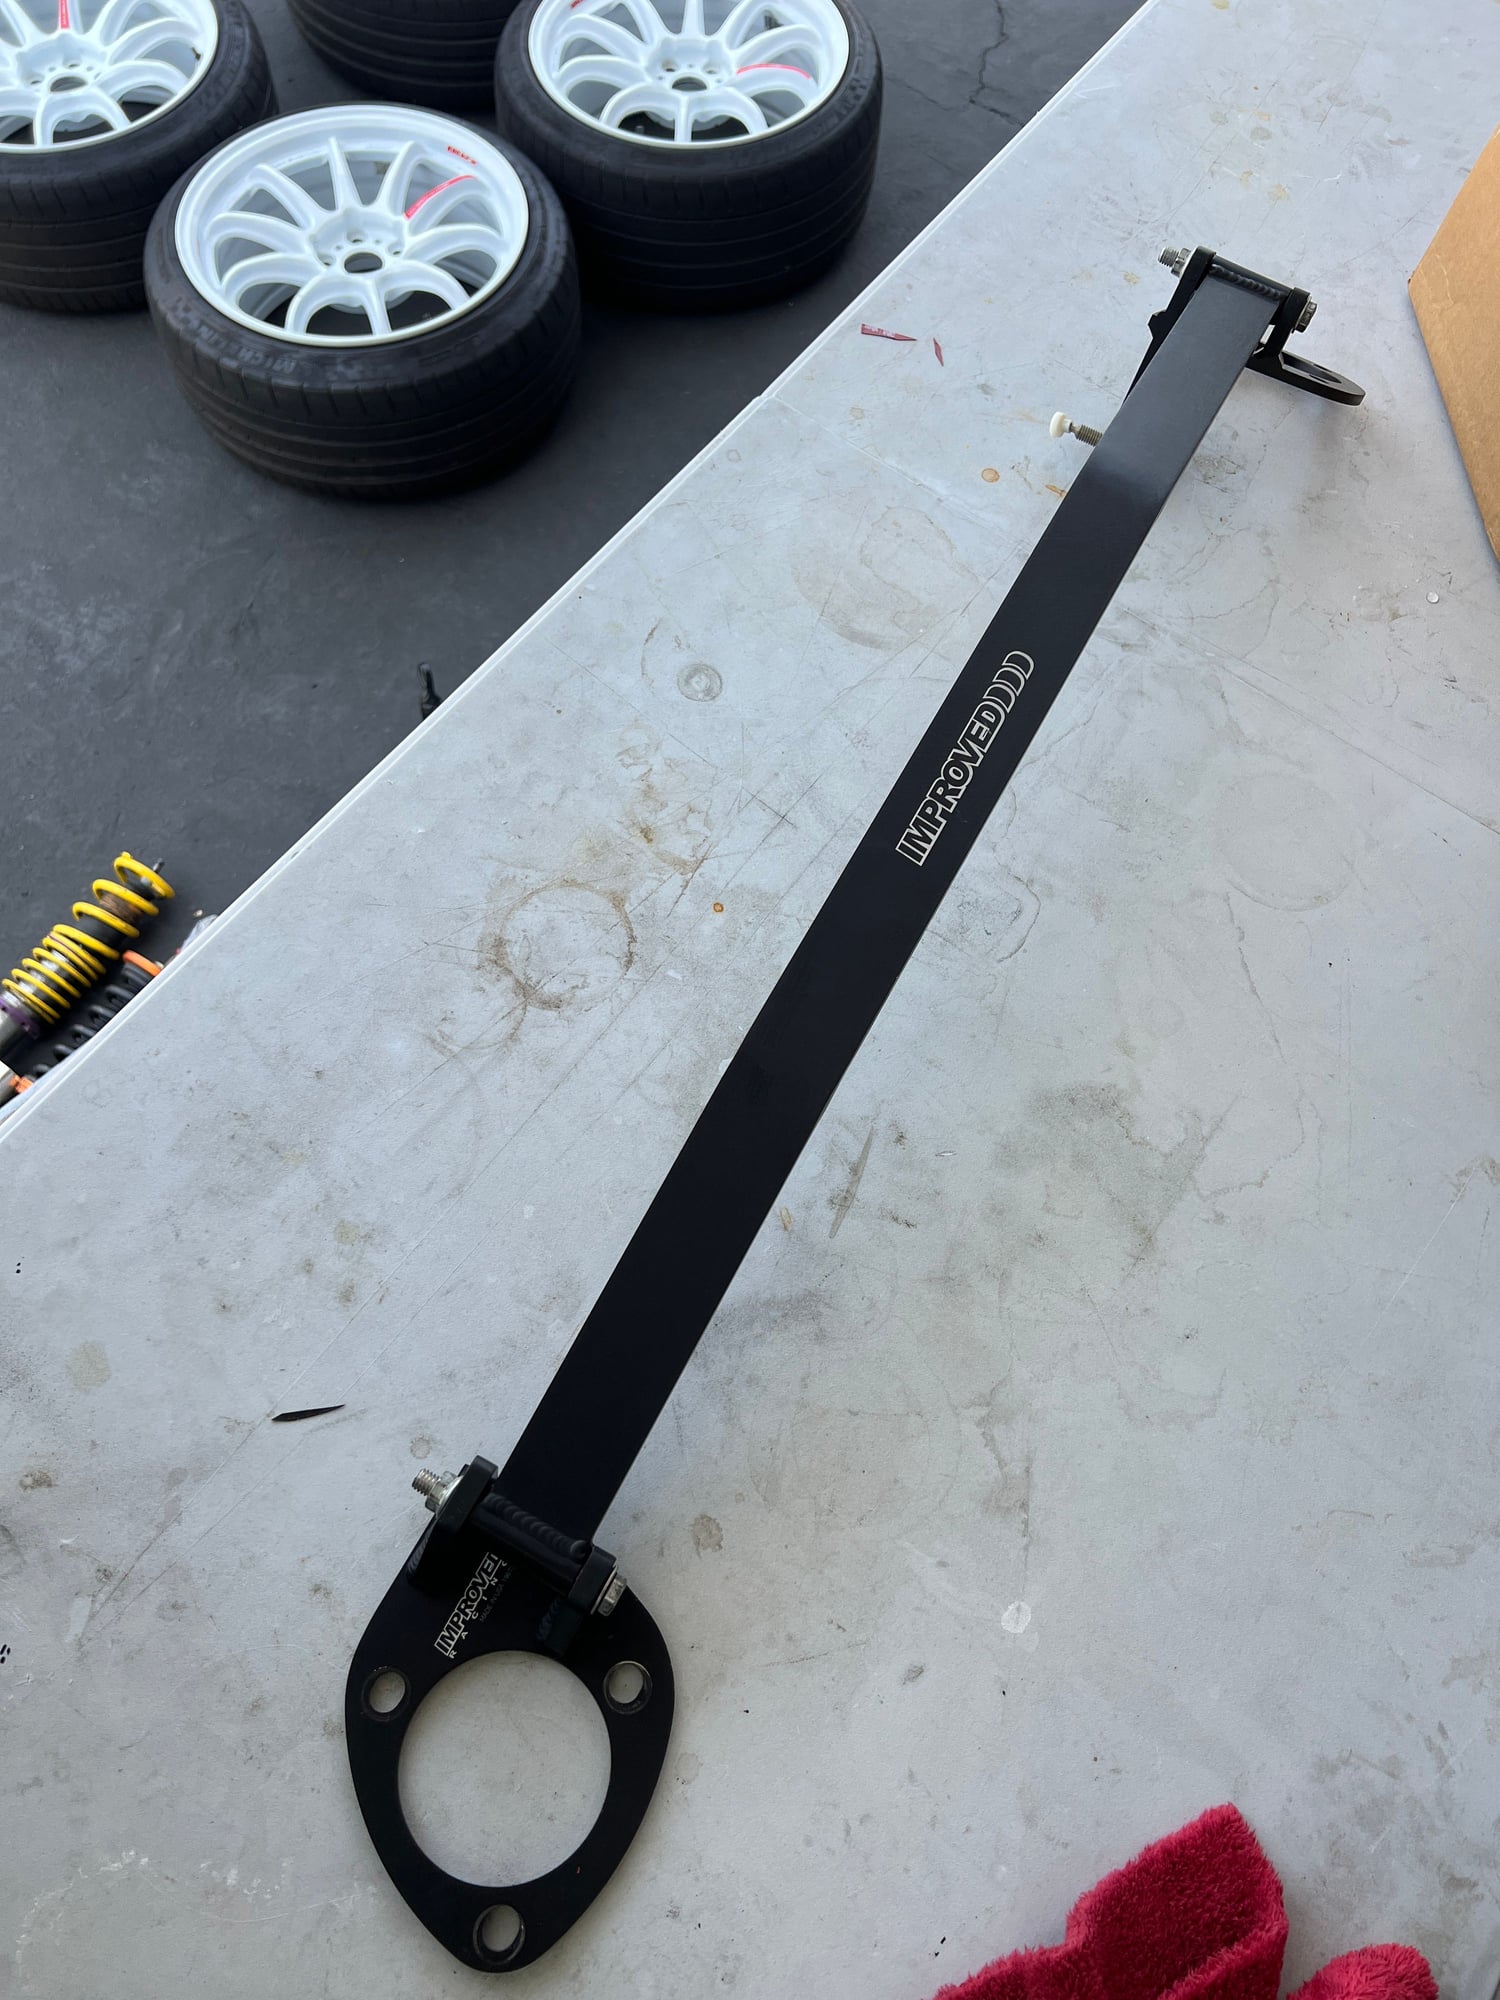 Steering/Suspension - Improved Racing Strut Tower Bar - Used - 1993 to 2002 Mazda RX-7 - Monrovia, California, CA 91016, United States